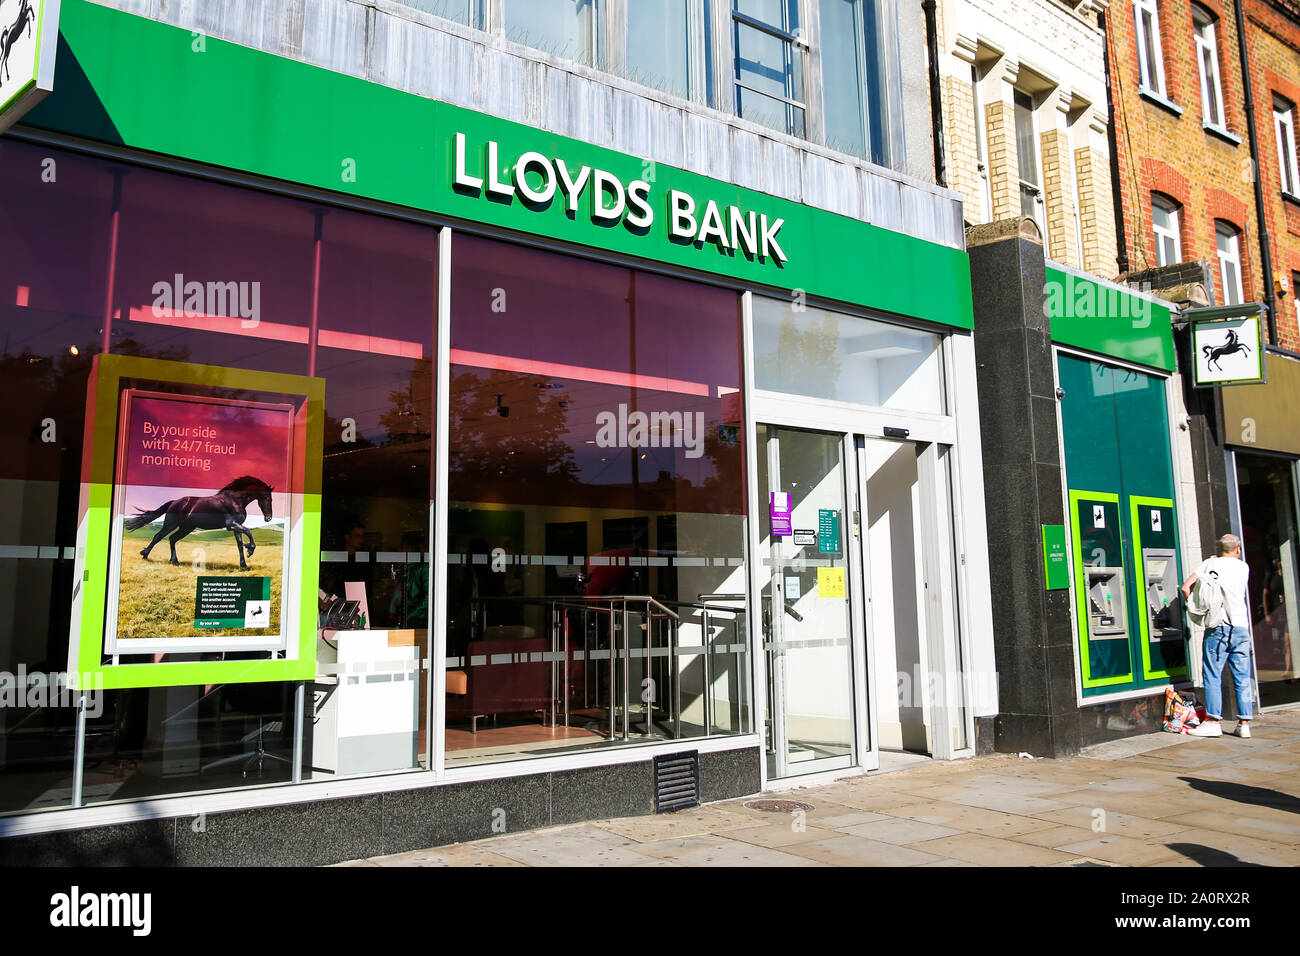 September 21, 2019, London, United Kingdom: An exterior view of Lloyds Bank in central London. Lloyds Bank plc is a British retail and commercial bank with branches across England and Wales. (Credit Image: © Dinendra Haria/SOPA Images via ZUMA Wire) Stock Photo